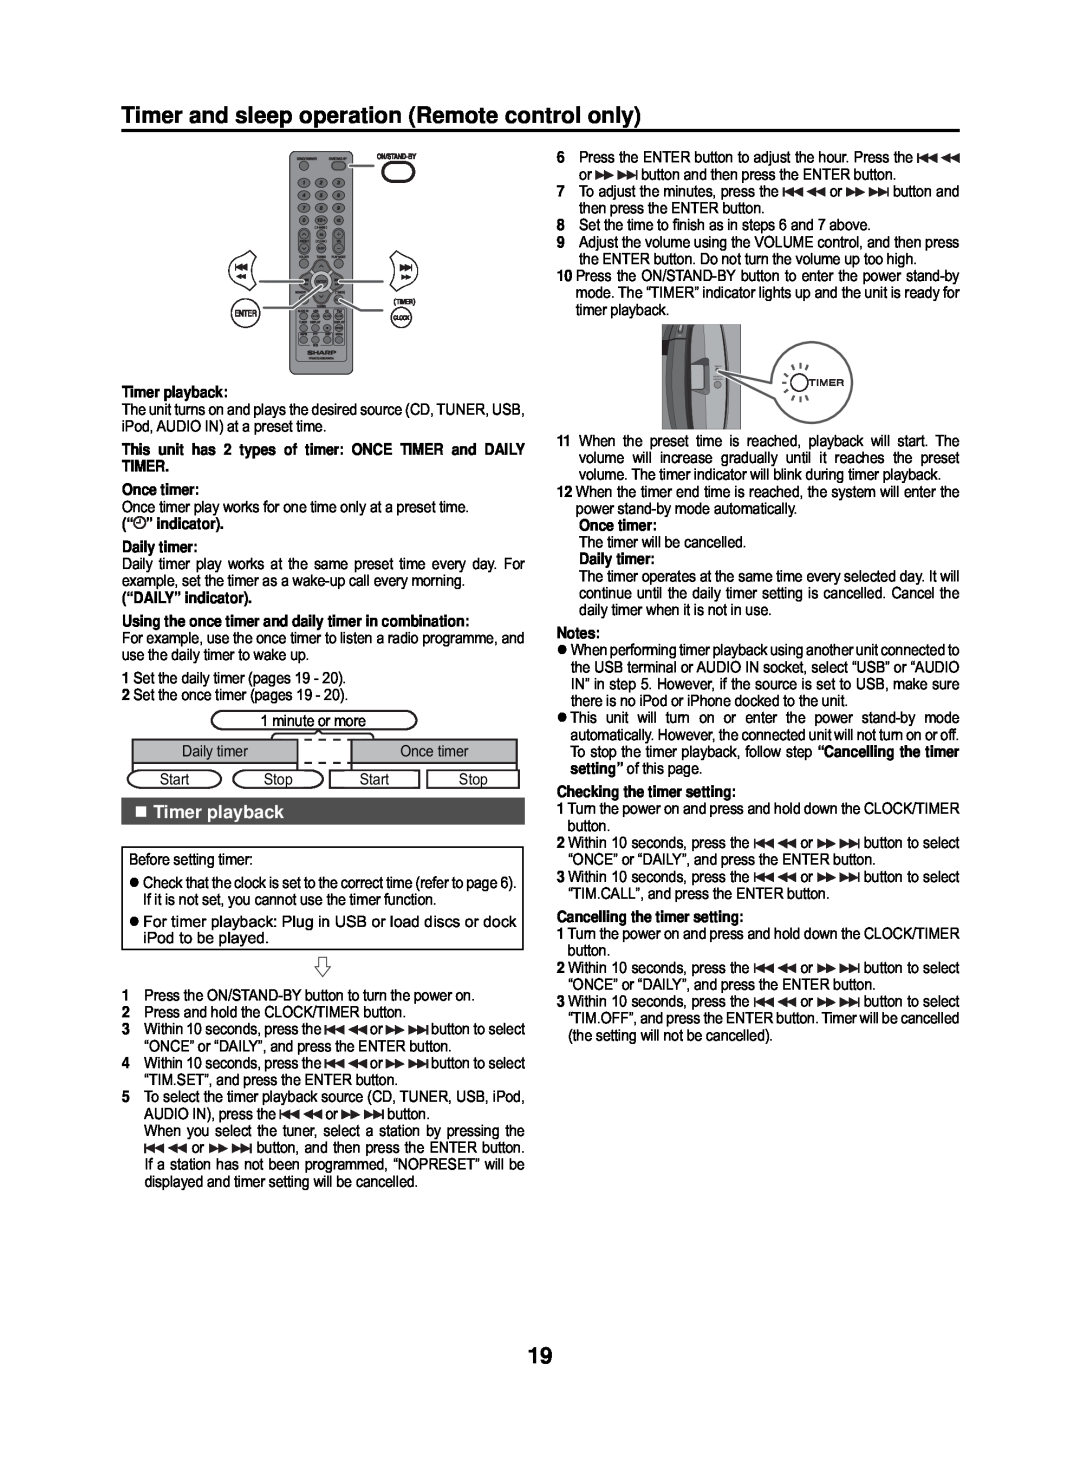 Sharp GX-M10H(OR), GX-M10H(RD) operation manual Timer and sleep operation Remote control only, „Timer playback 